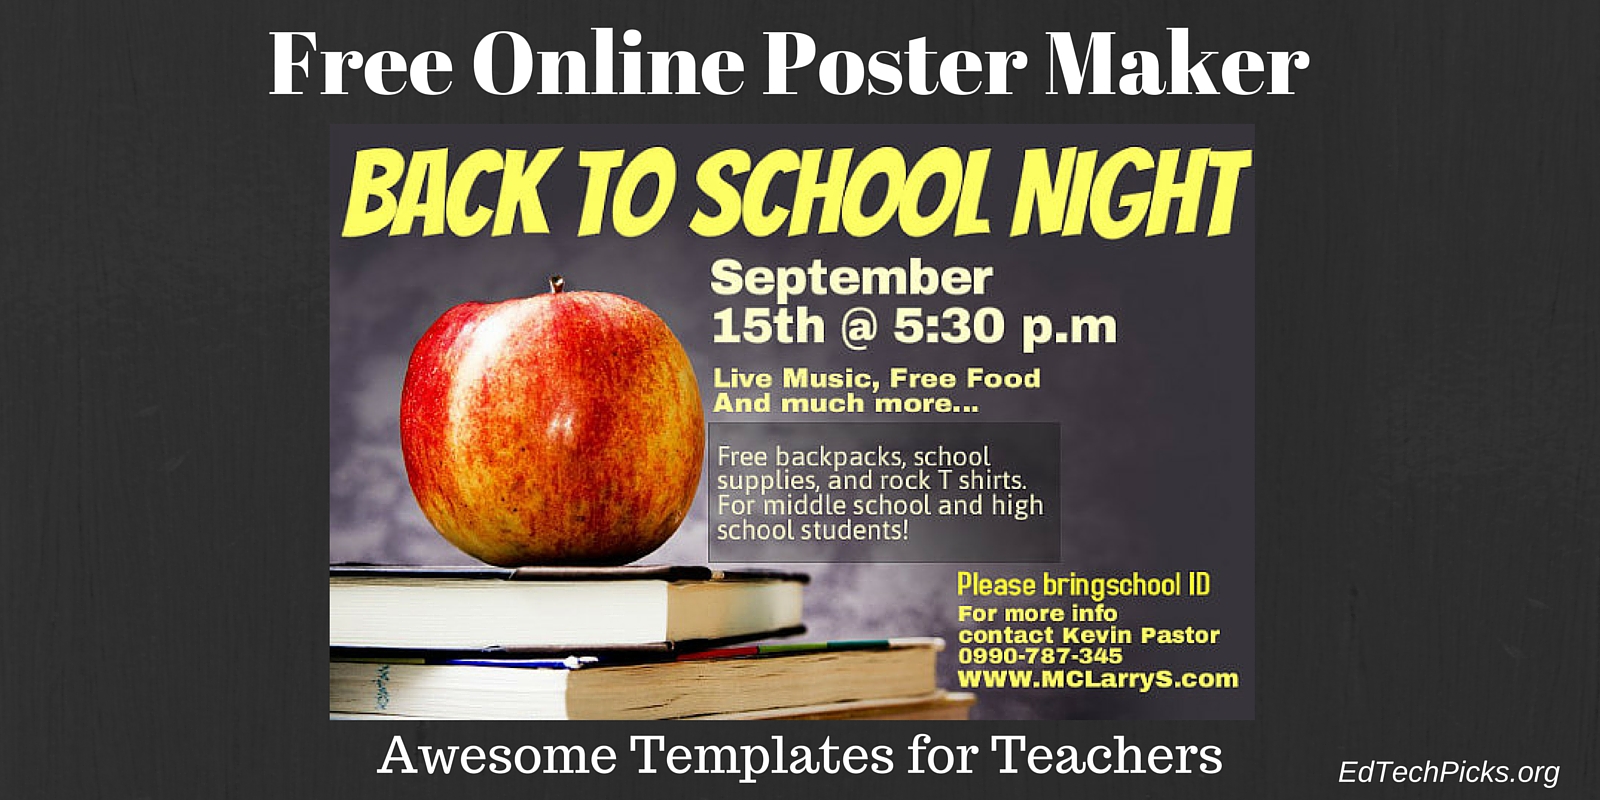 A Free Online Poster Maker - Perfect for the Classroom